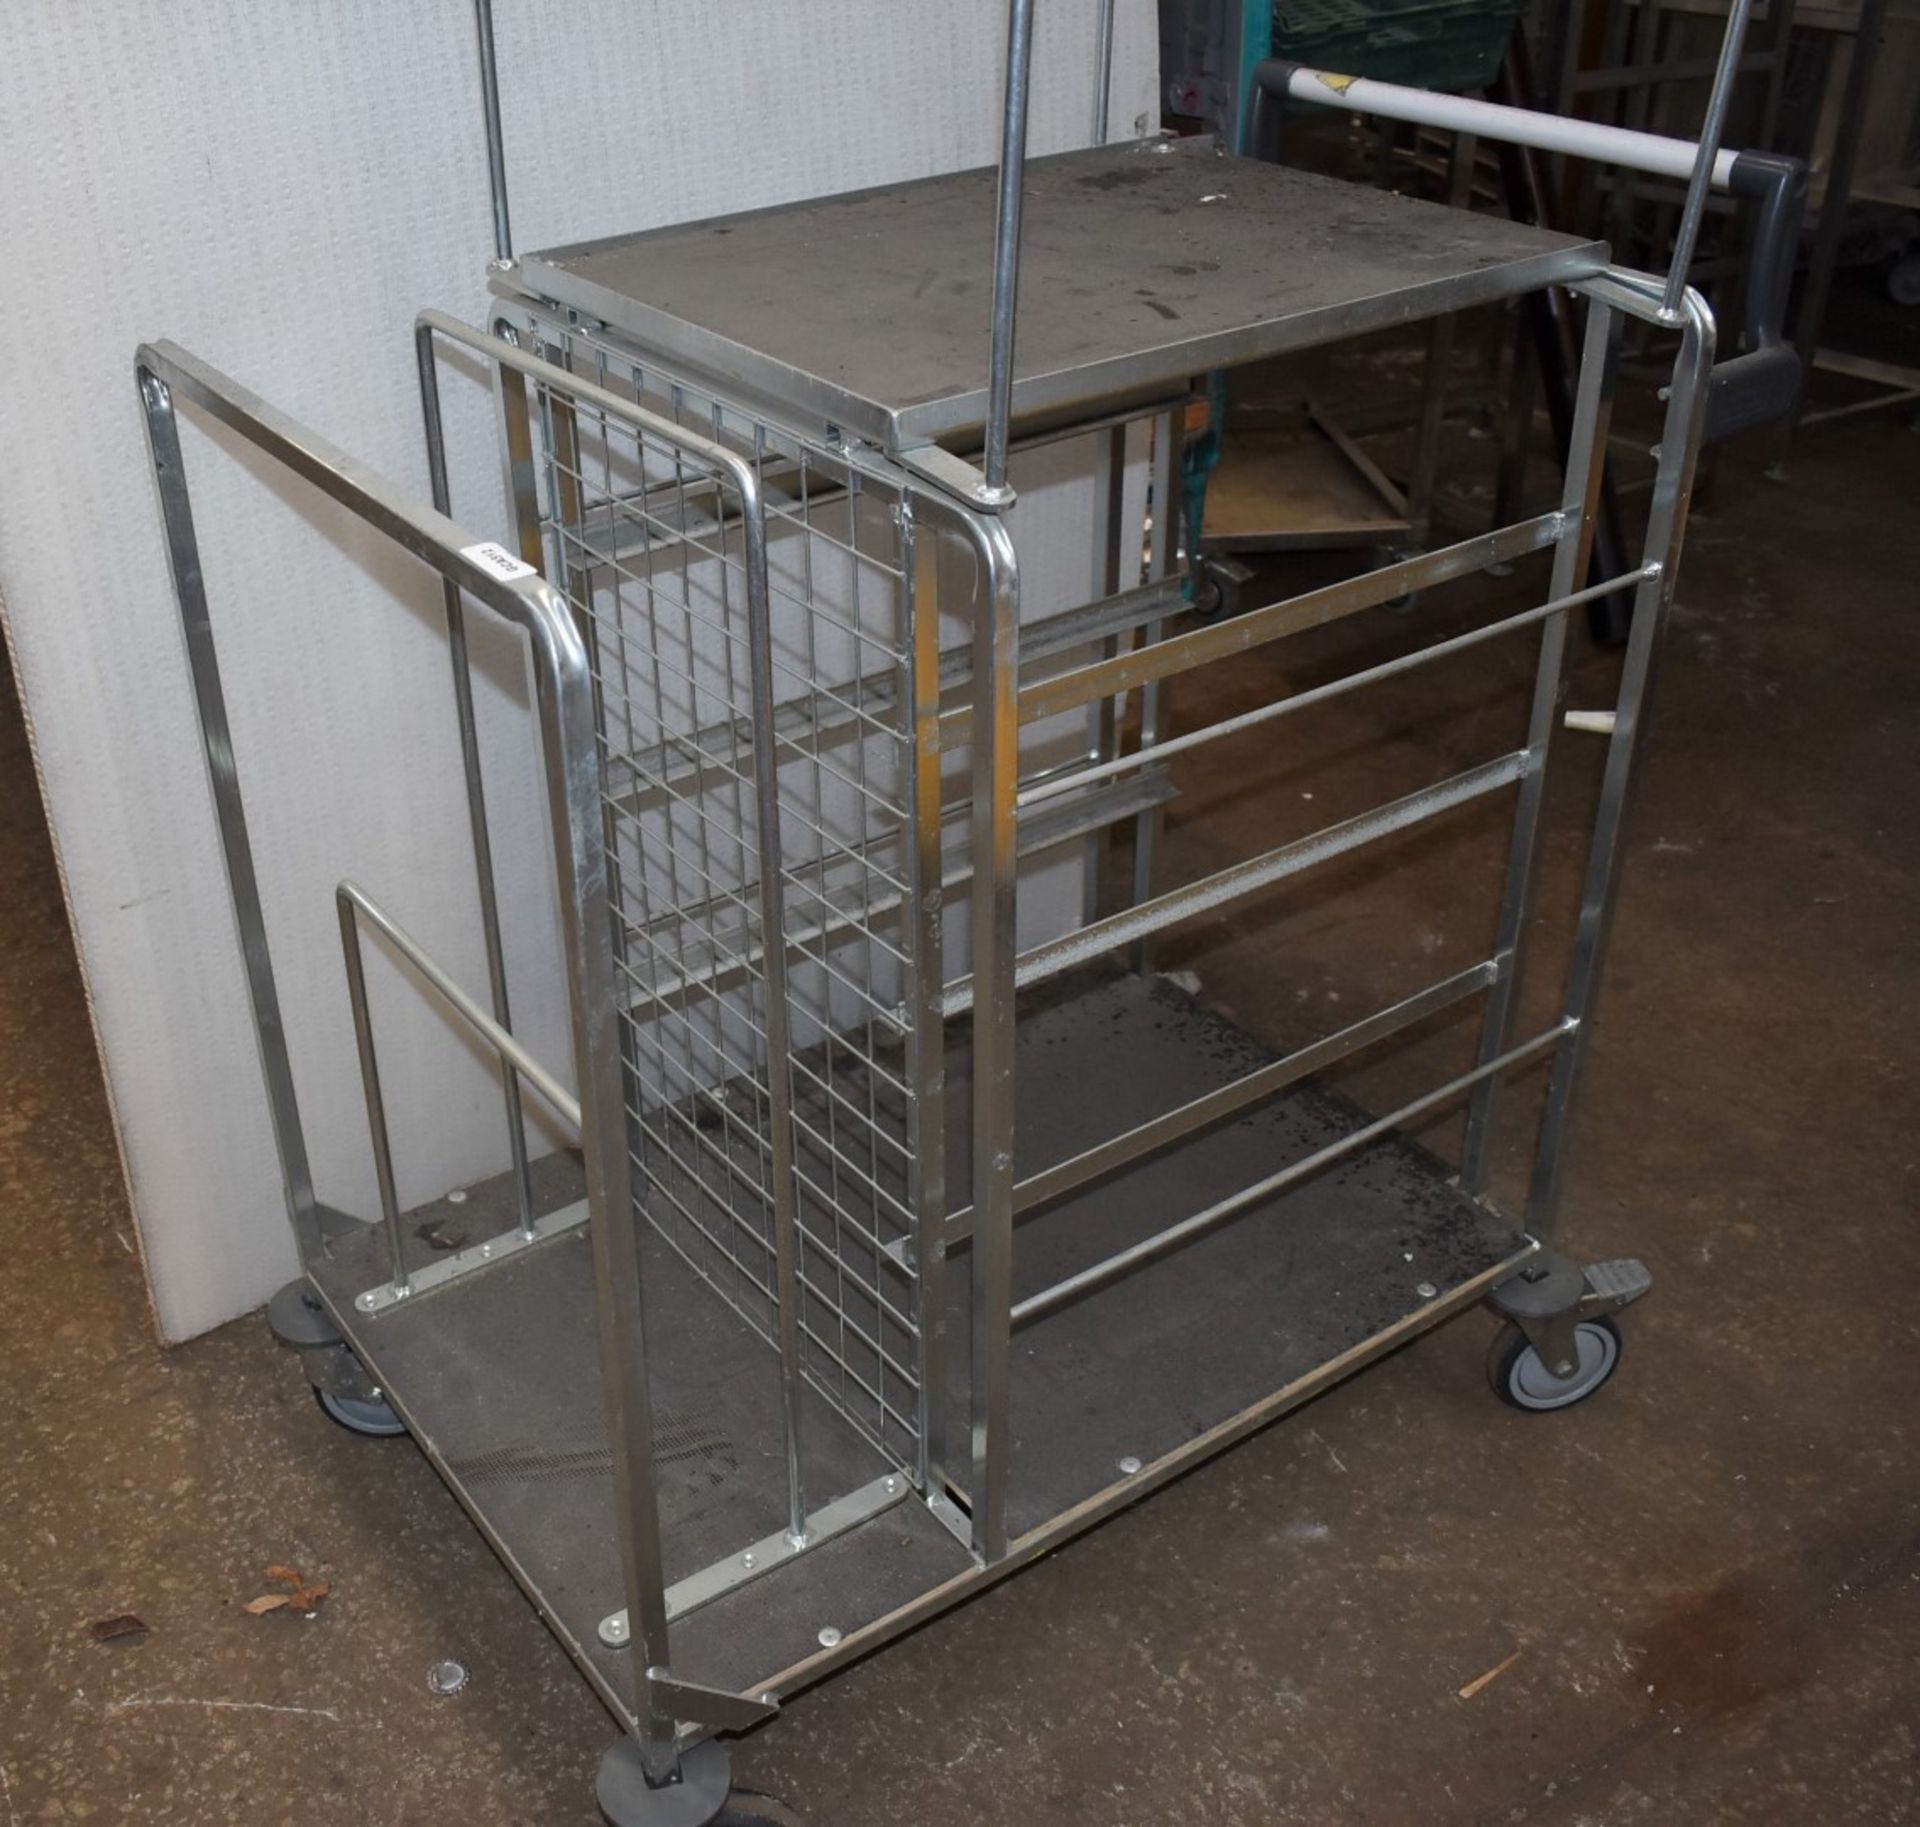 1 x Mobile Picker / Packer Trolly - Overall Size H105 x W100 x D60 cms - CL011 - Ref GC512 WH5 - - Image 2 of 5